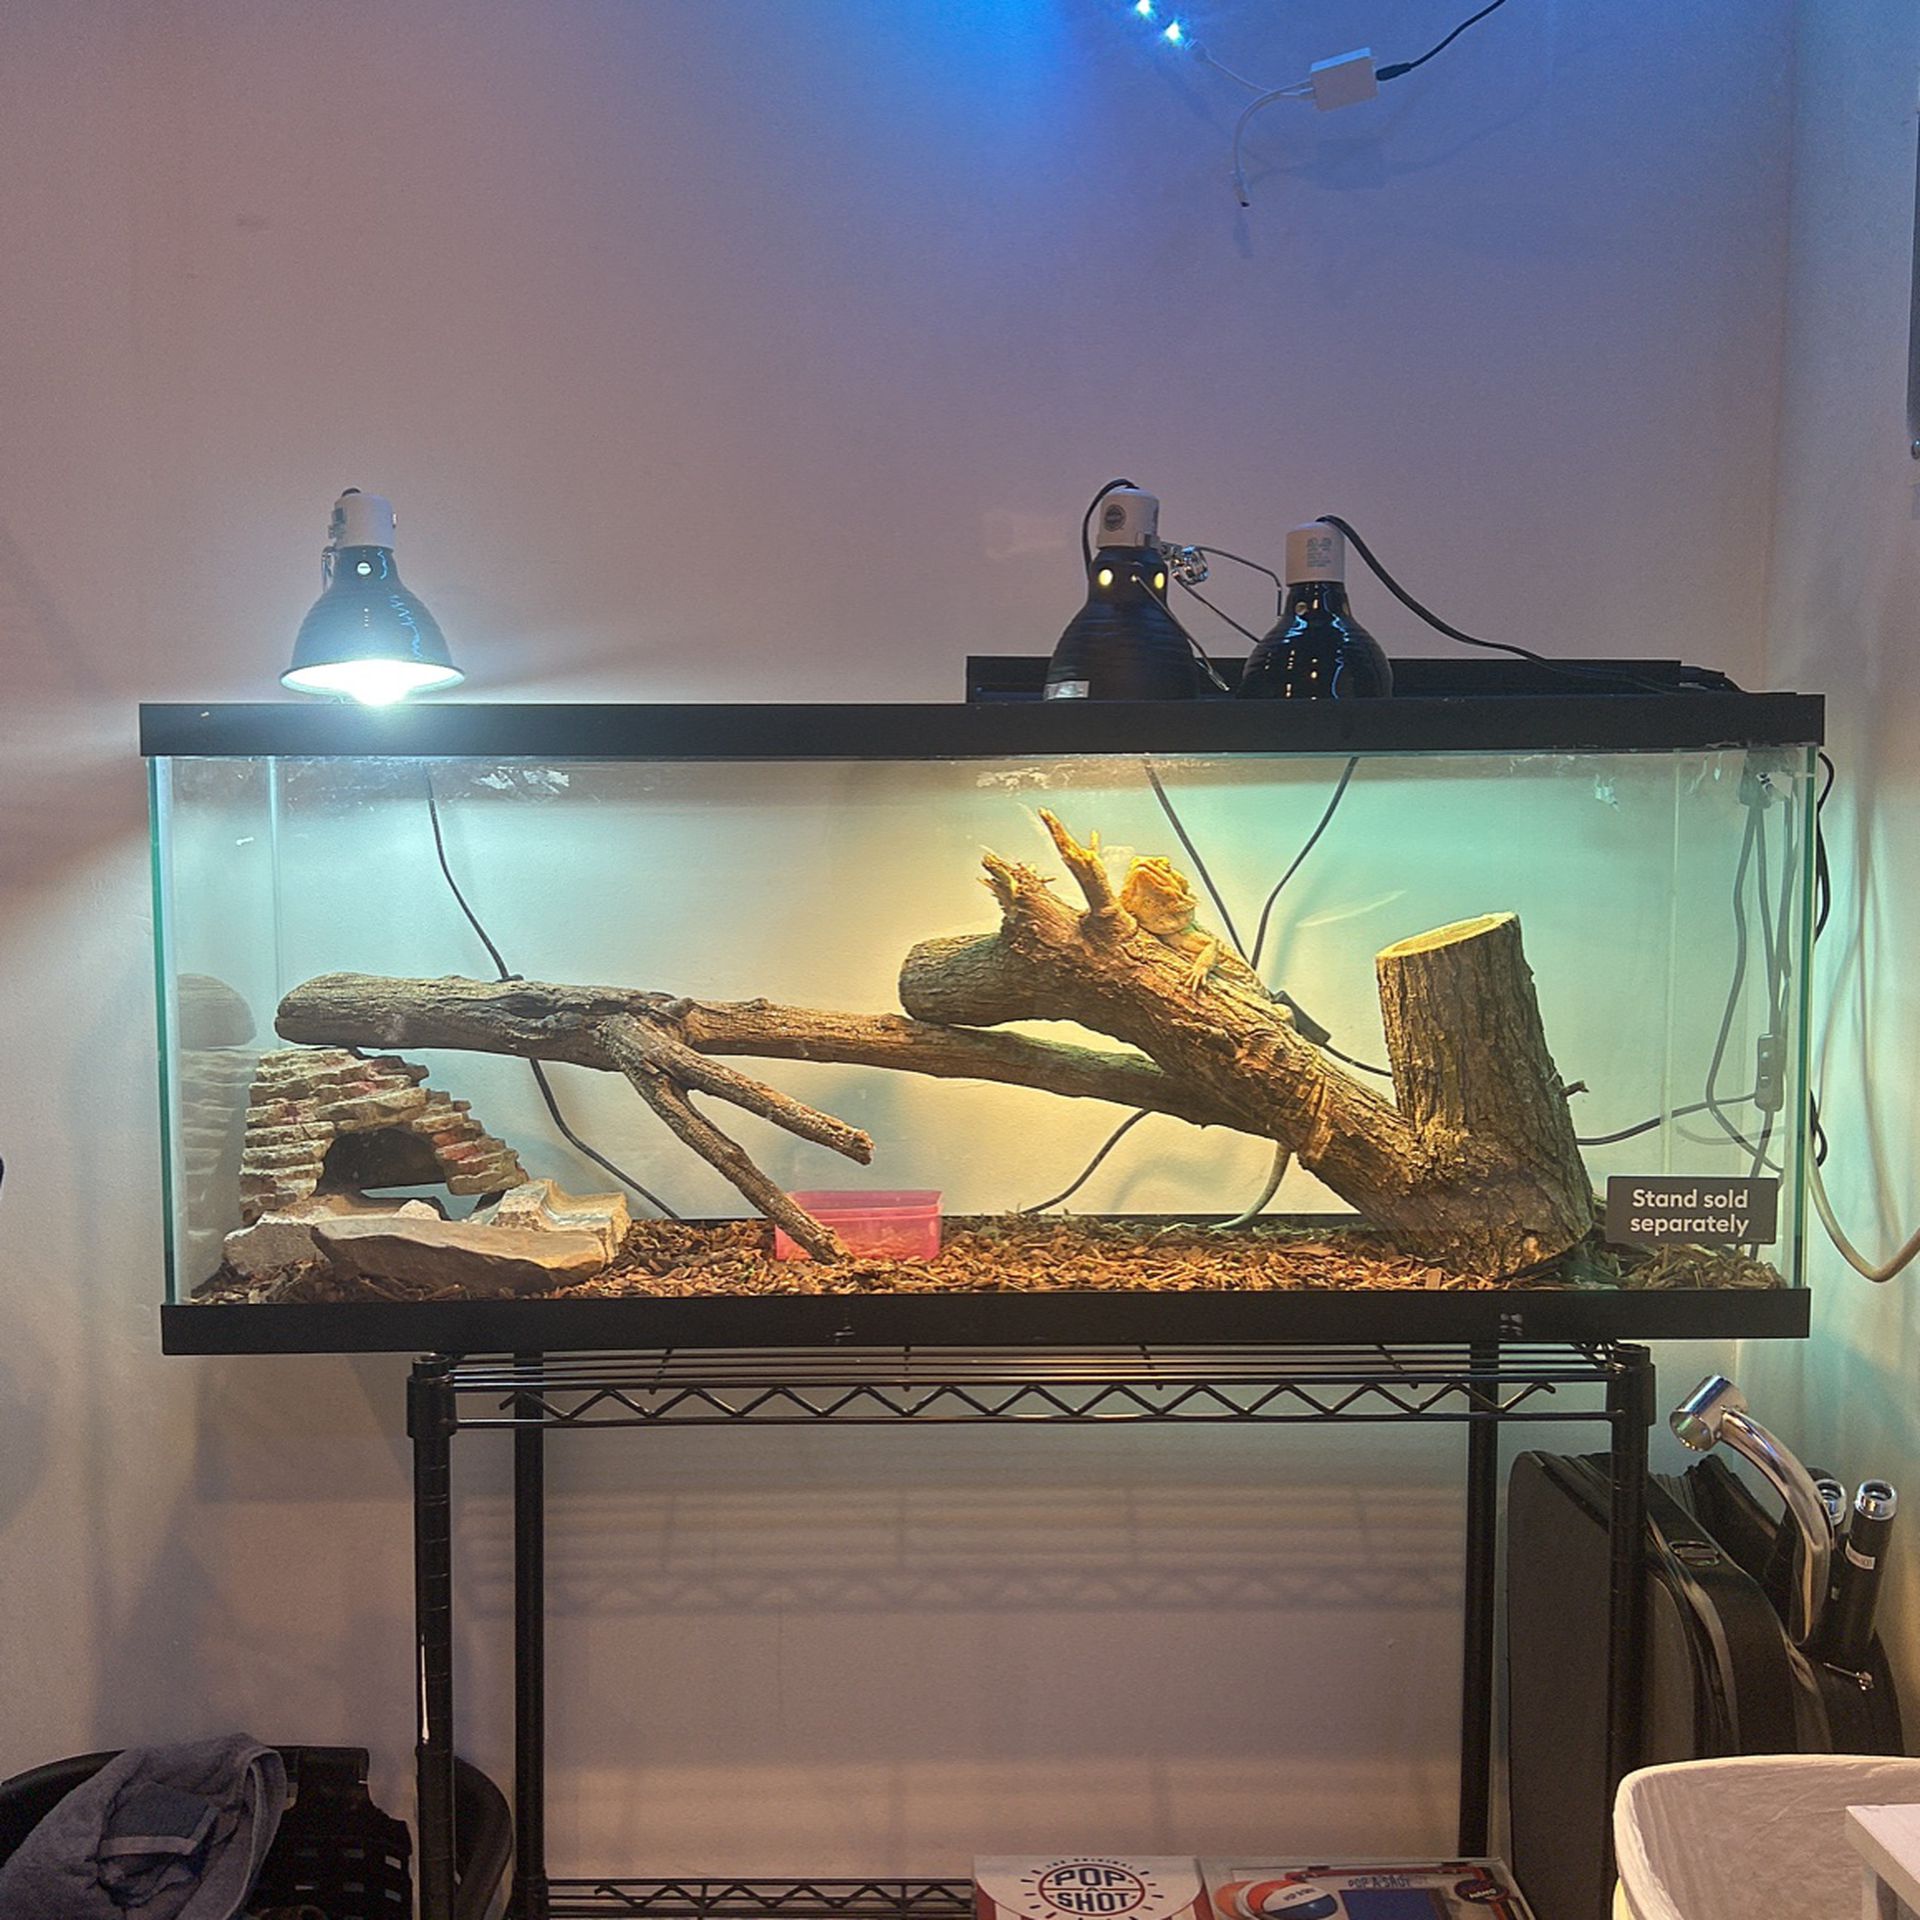 55 Gallon Fish Tank Doesn’t Come With Things Inside 